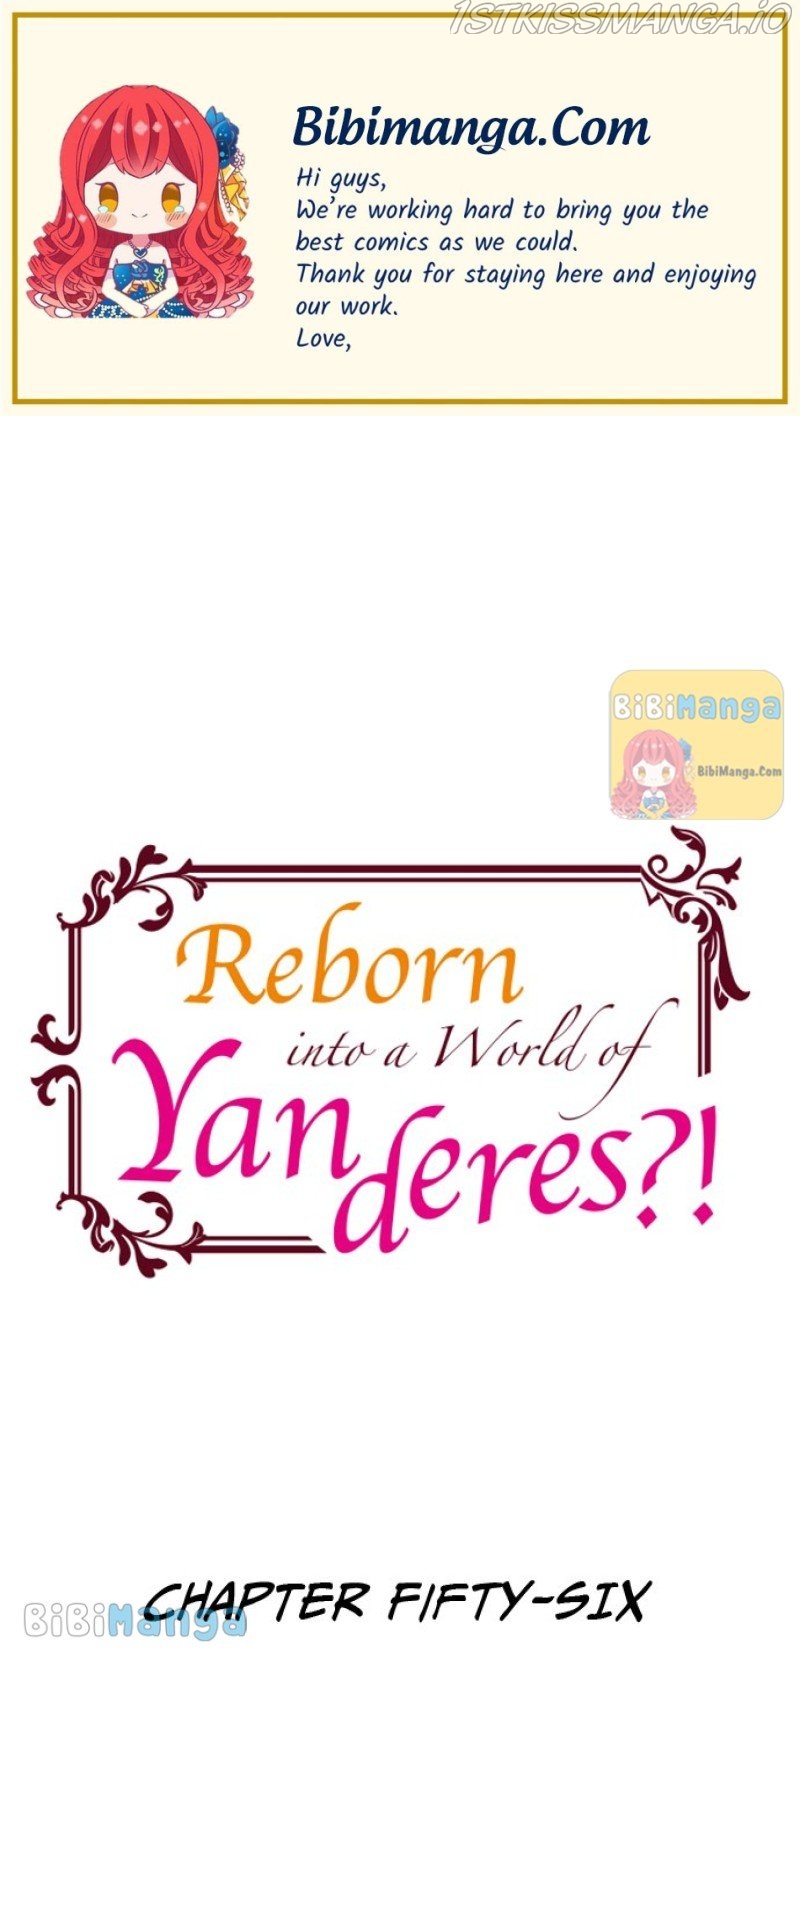 Reborn into a World of Yanderes?! chapter 56